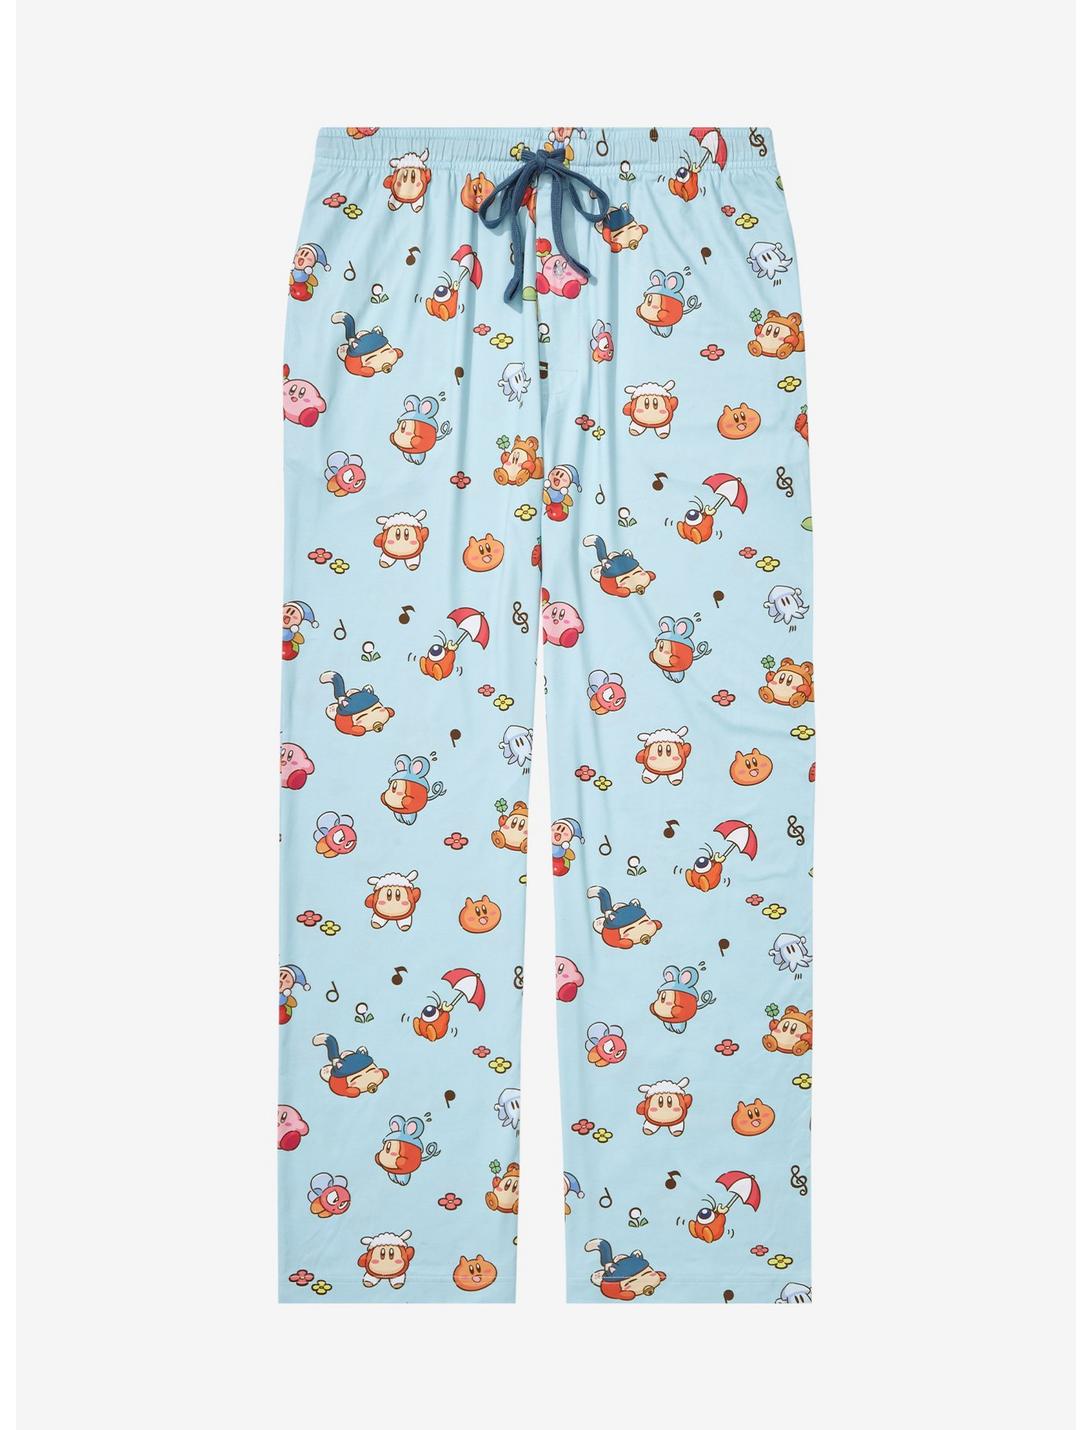 Nintendo Kirby & Waddle Dee Outfits Allover Print Sleep Pants - BoxLunch Exclusive, LIGHT BLUE, hi-res